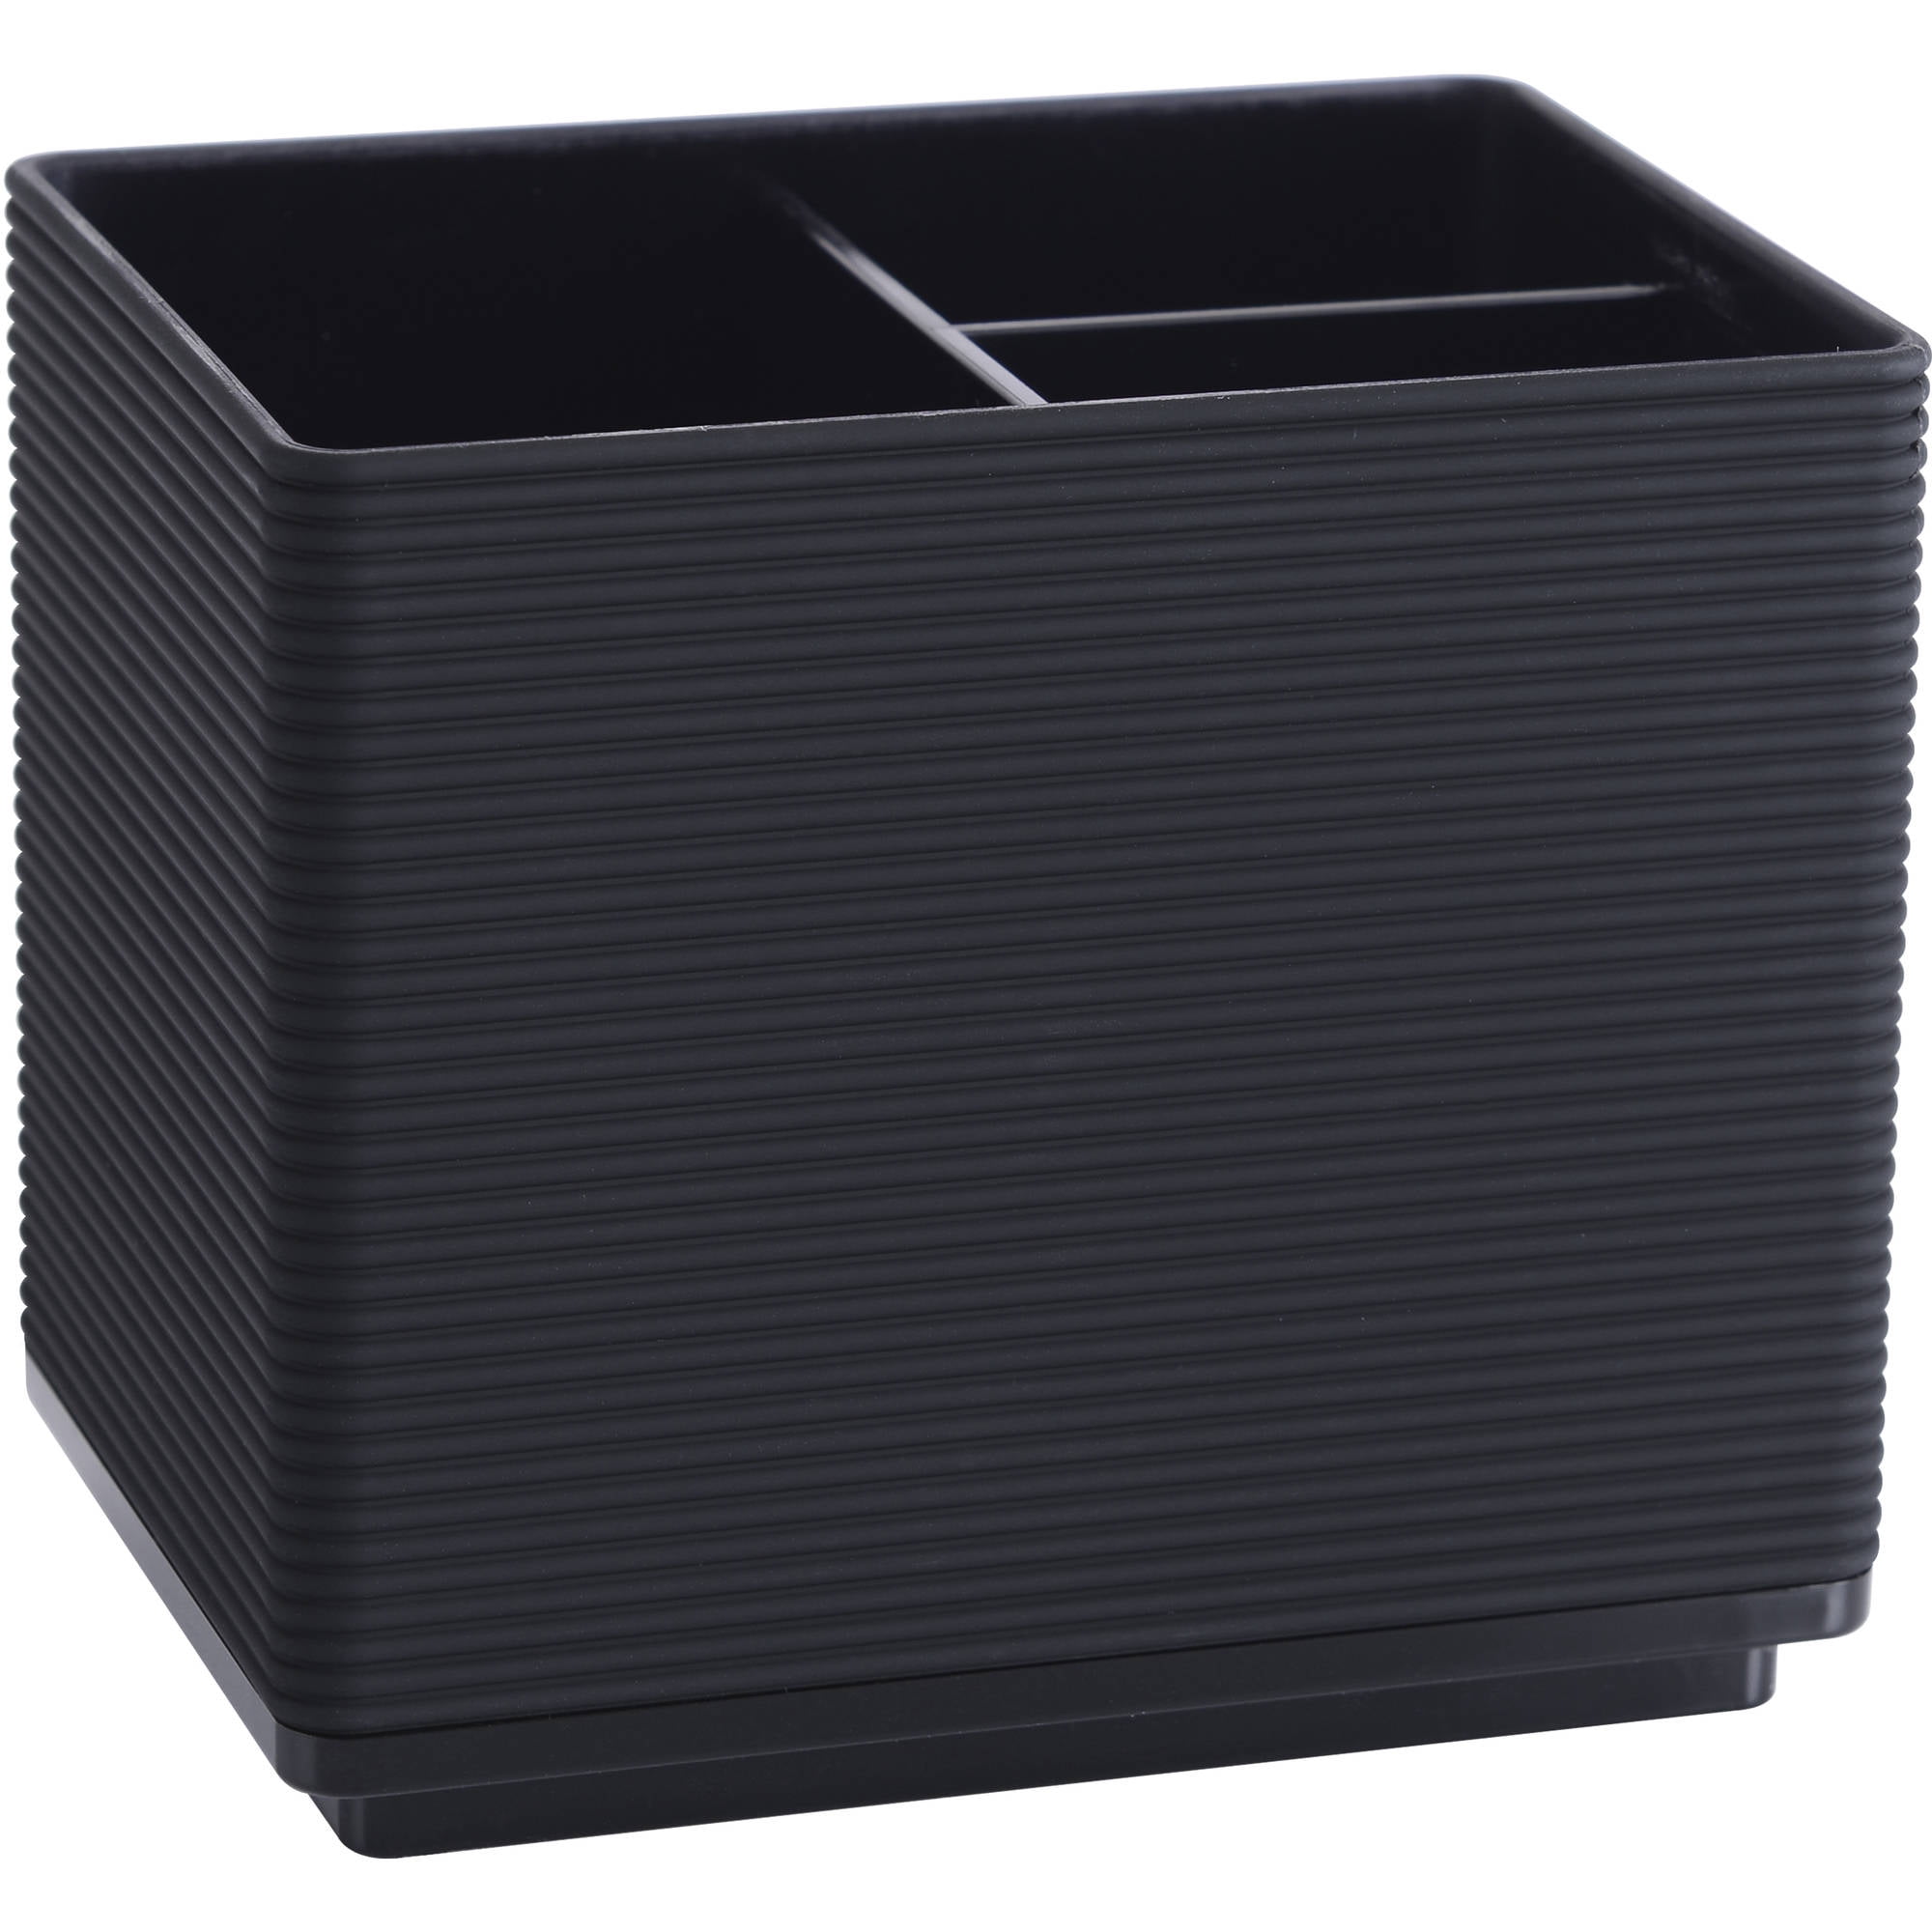 Mainstays Soft Touch Ribbed Plastic Organizer in Black with 3 Compartments